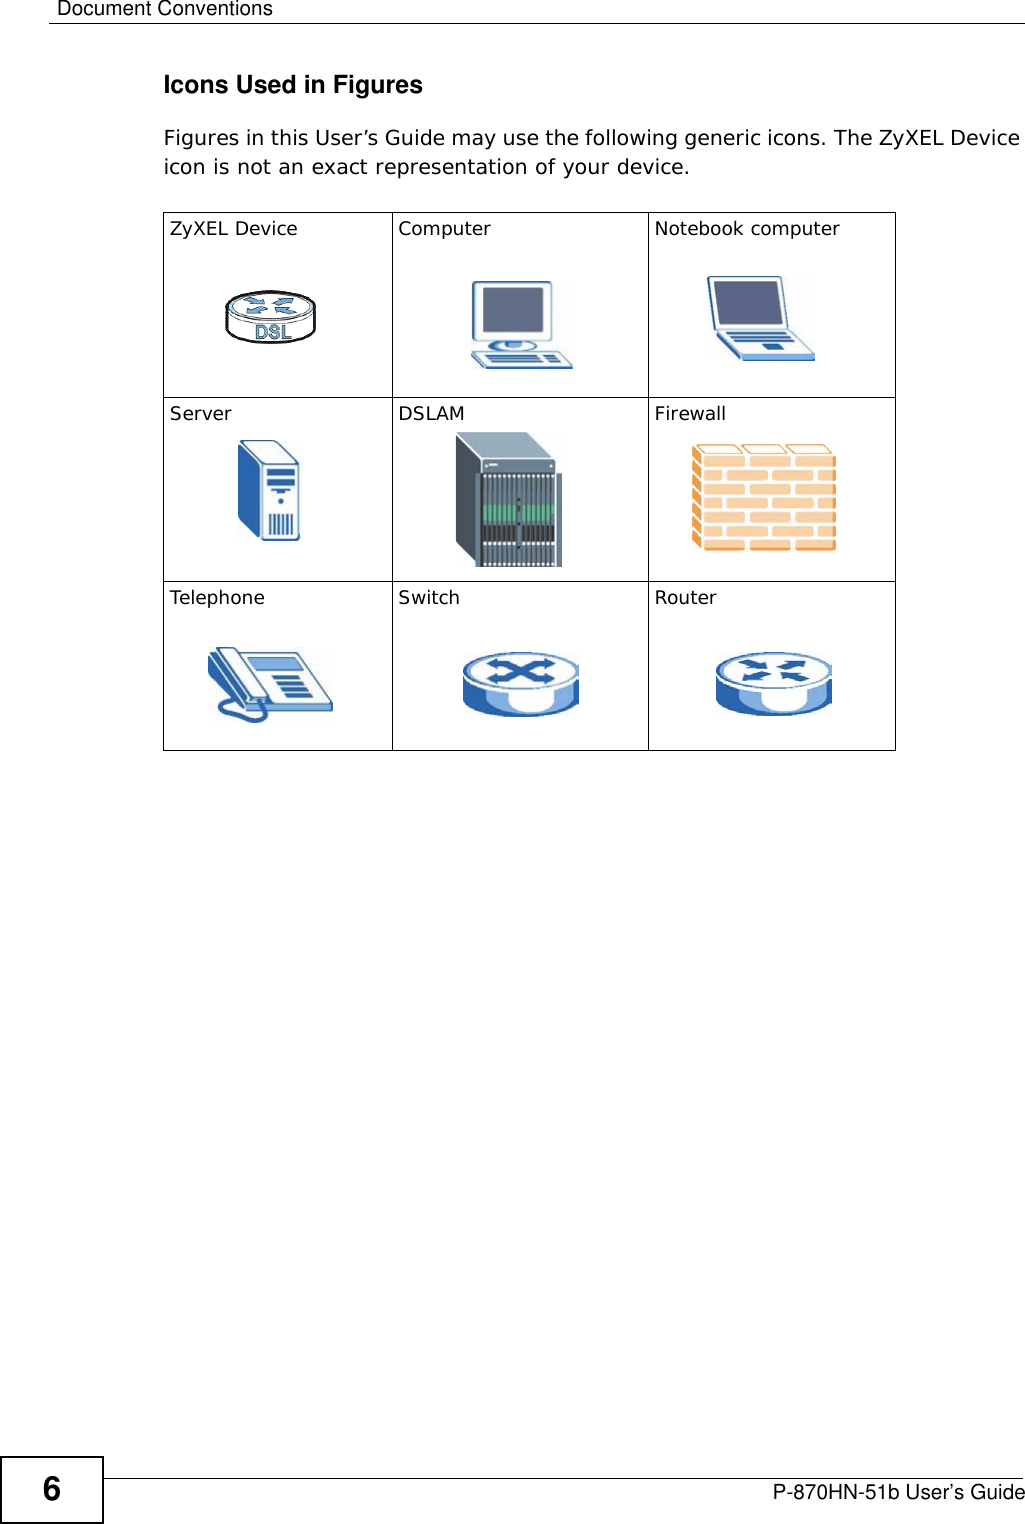 Document ConventionsP-870HN-51b User’s Guide6Icons Used in FiguresFigures in this User’s Guide may use the following generic icons. The ZyXEL Device icon is not an exact representation of your device.ZyXEL Device Computer Notebook computerServer DSLAM FirewallTelephone Switch Router